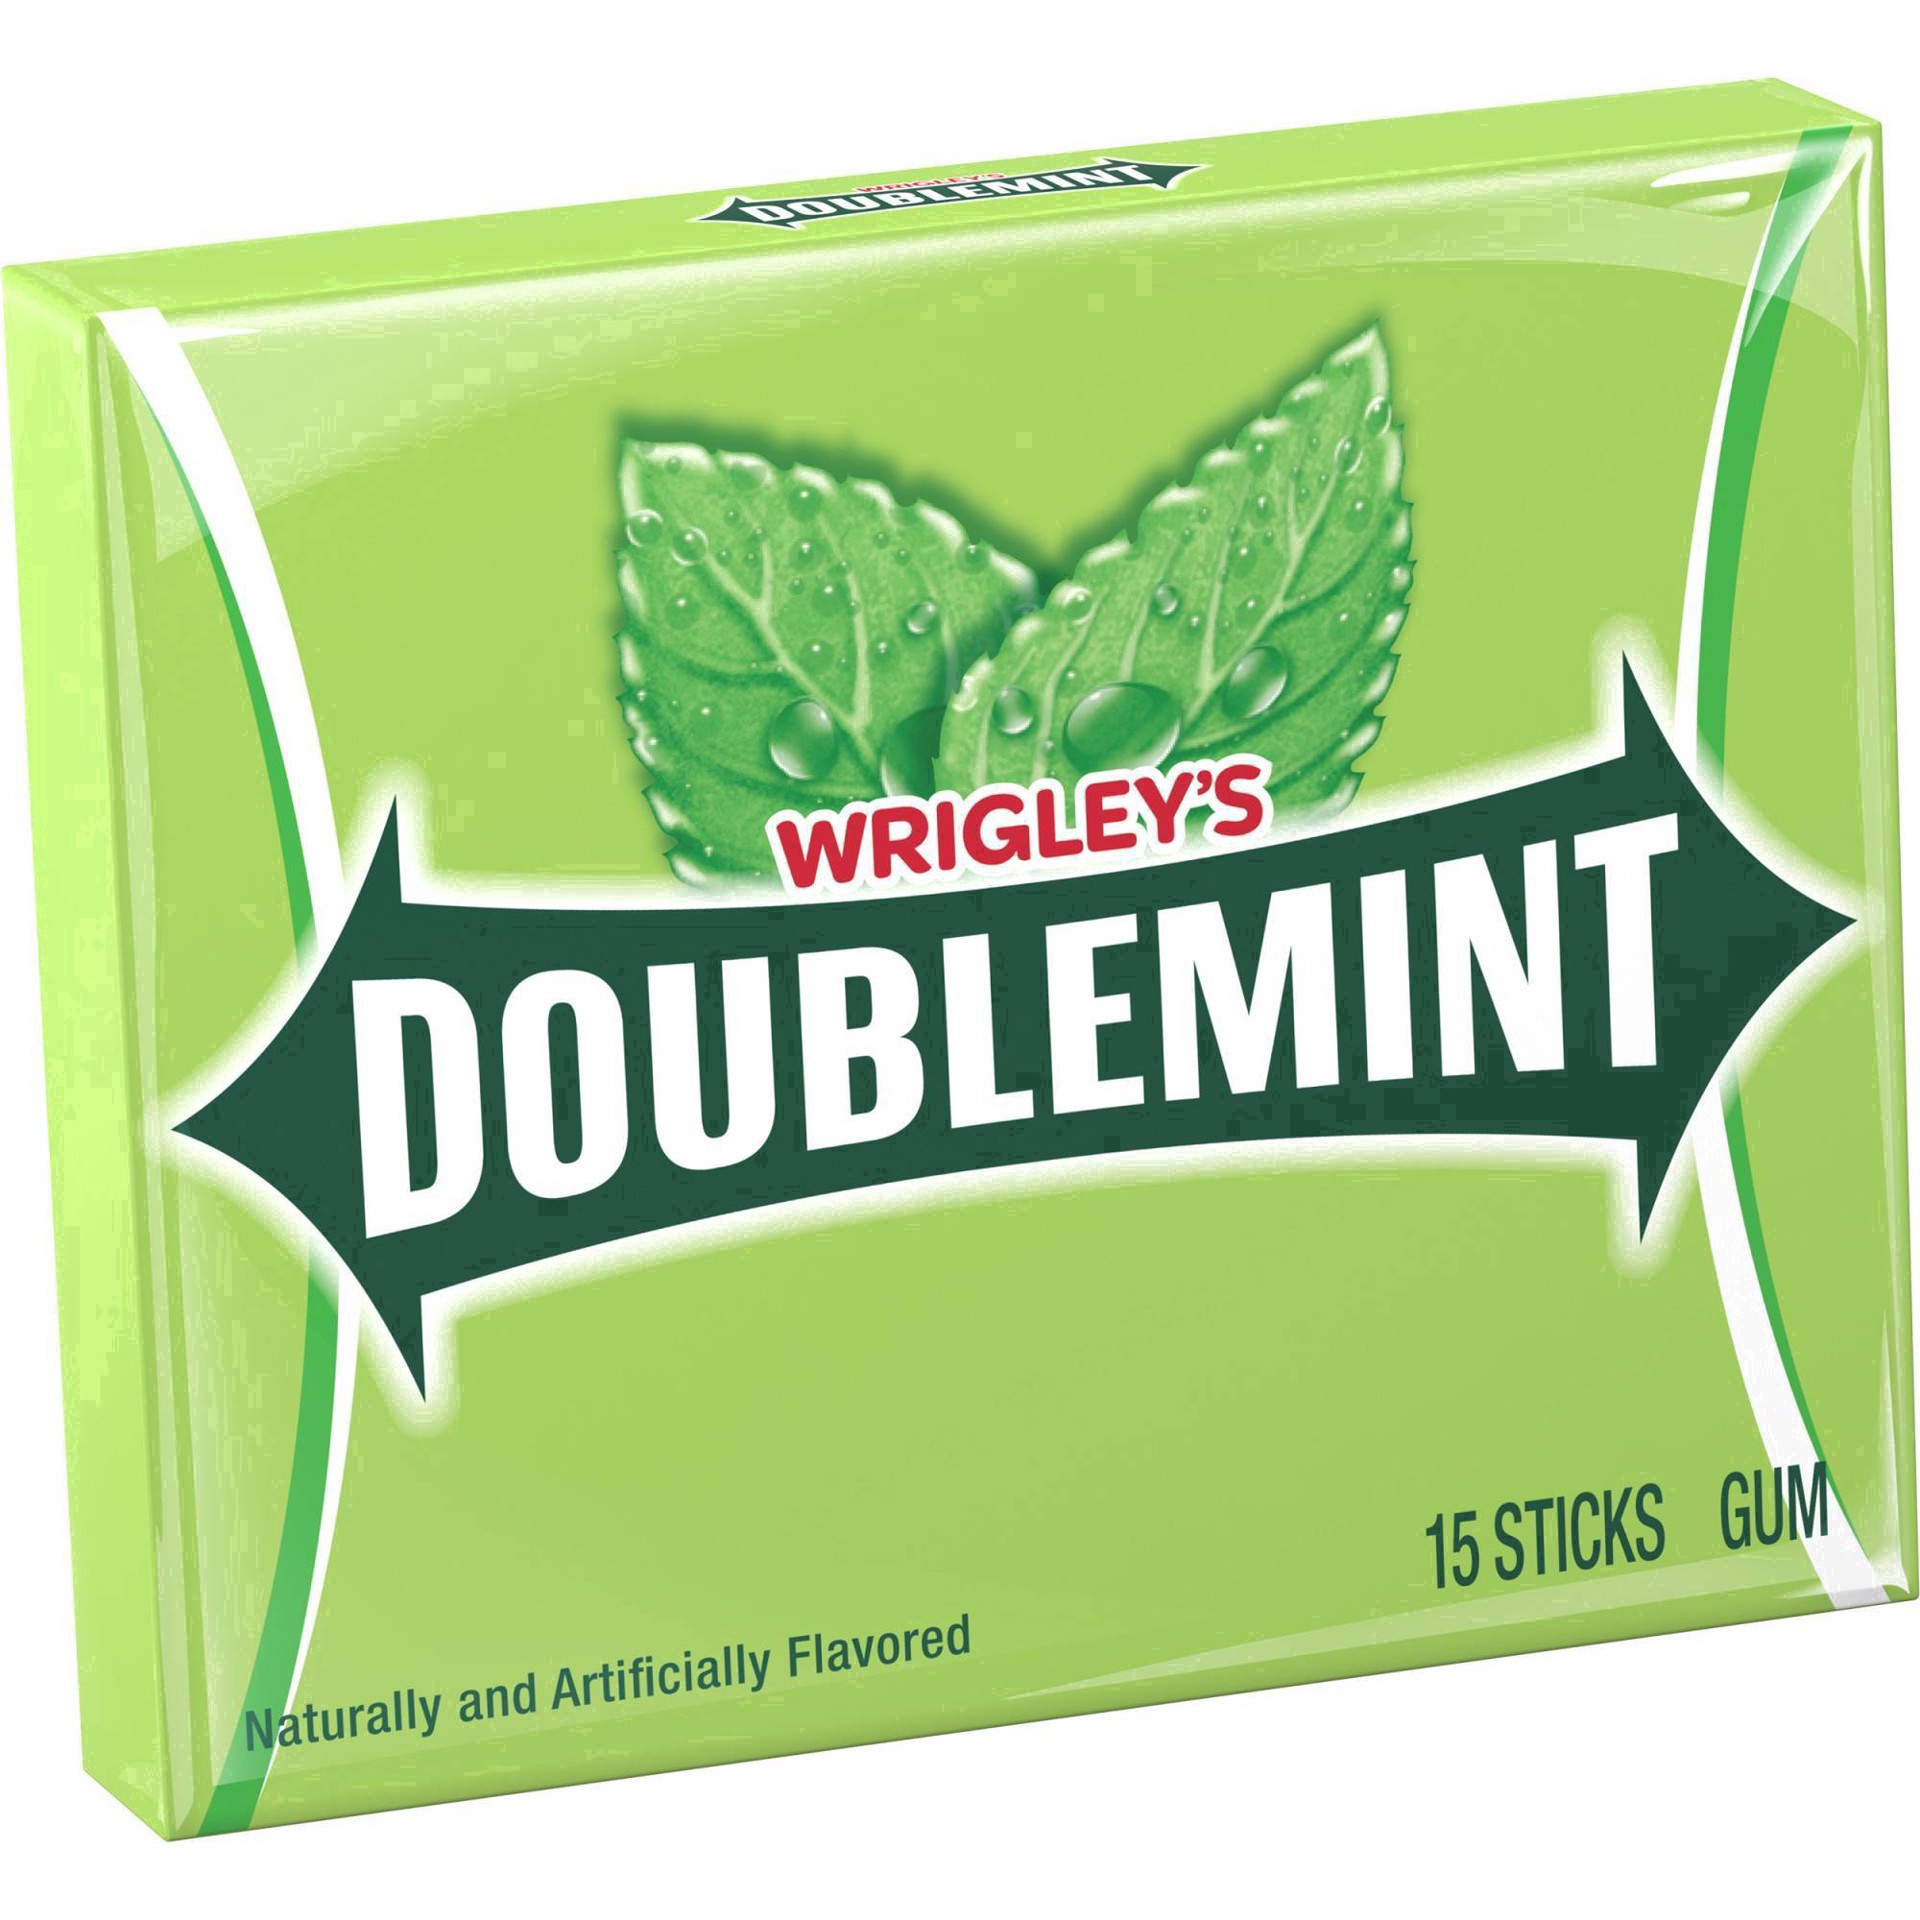 slide 62 of 134, Doublemint WRIGLEY'S DOUBLEMINT Bulk Chewing Gum, Value Pack, 15 ct (3 Pack), 45 ct